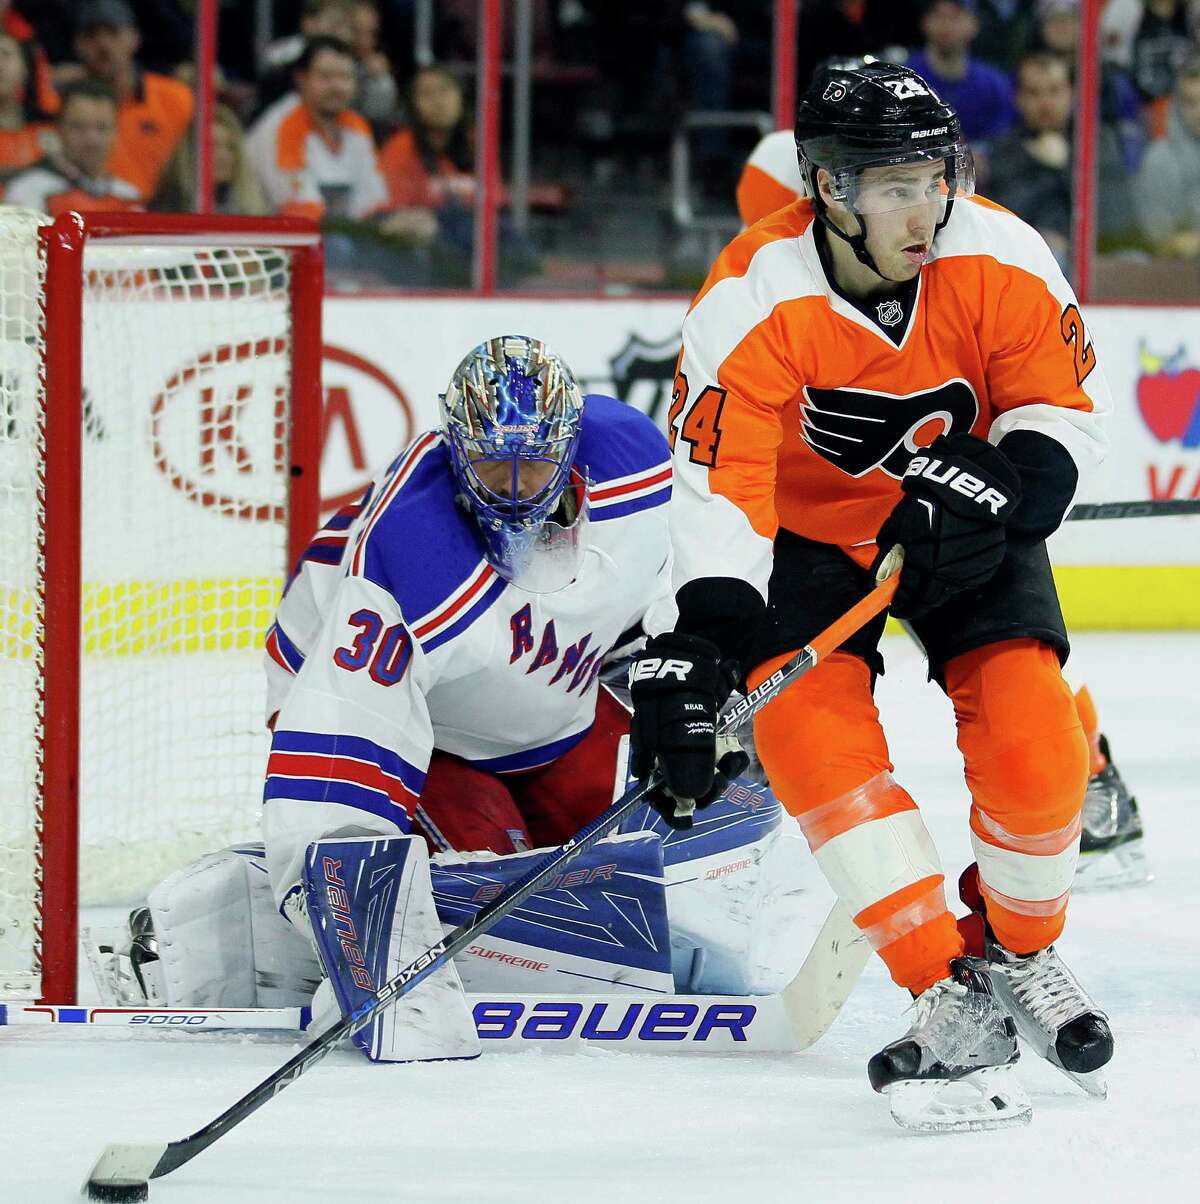 Philadelphia Flyers' Matt Read, with the puck on his stick, looks for an open man in front of the net defended by New York Rangers' Henrik Lundqvist during the second period of an NHL hockey game Saturday, Jan 16, 2016 in Philadelphia. The Rangers won 3-2 in overtime (AP Photo /Tom Mihalek) ORG XMIT: PATM111